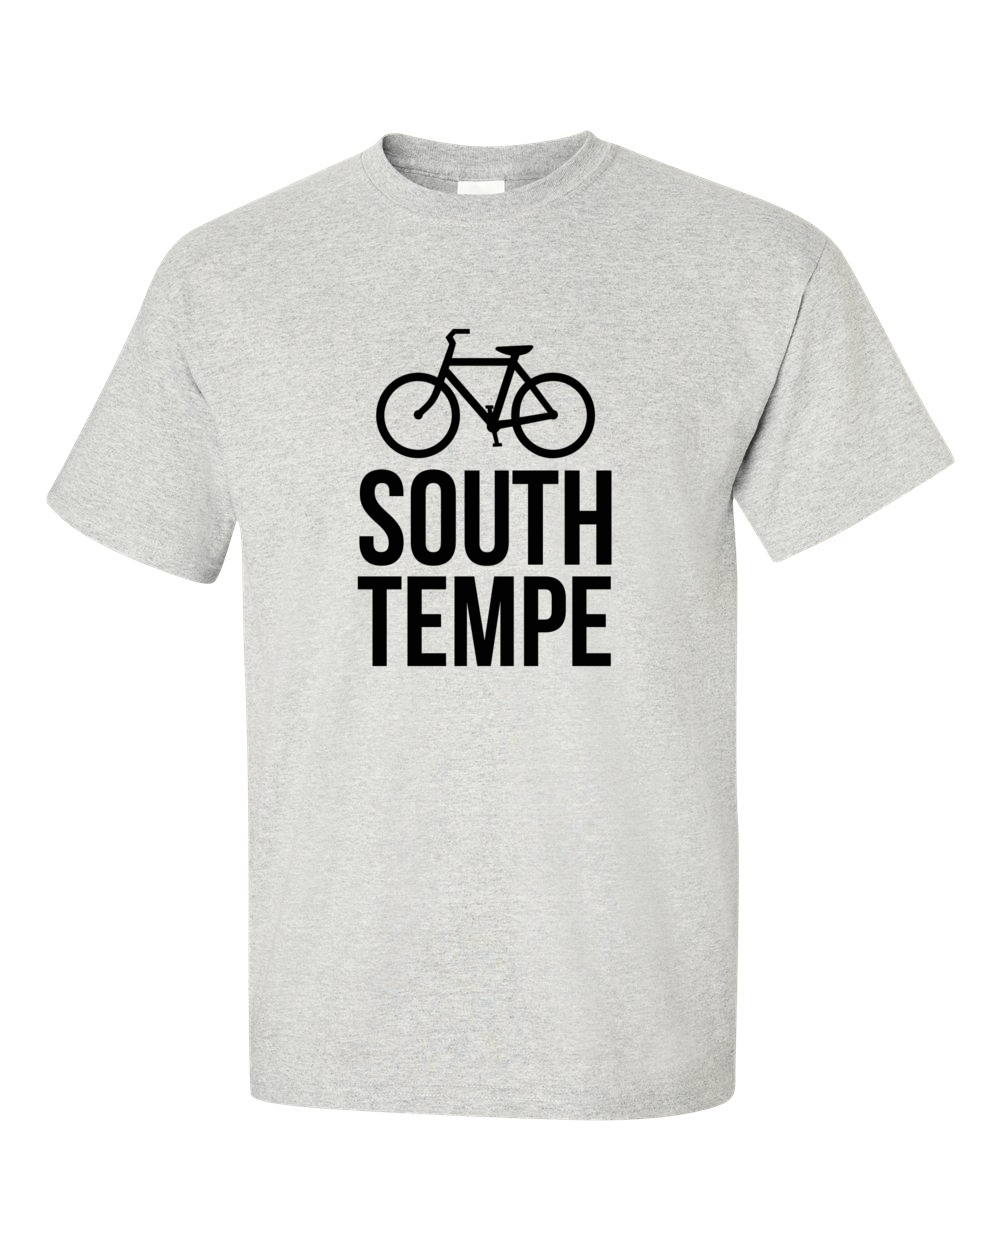 Image of South Tempe - Gray Shirt with Black Letters